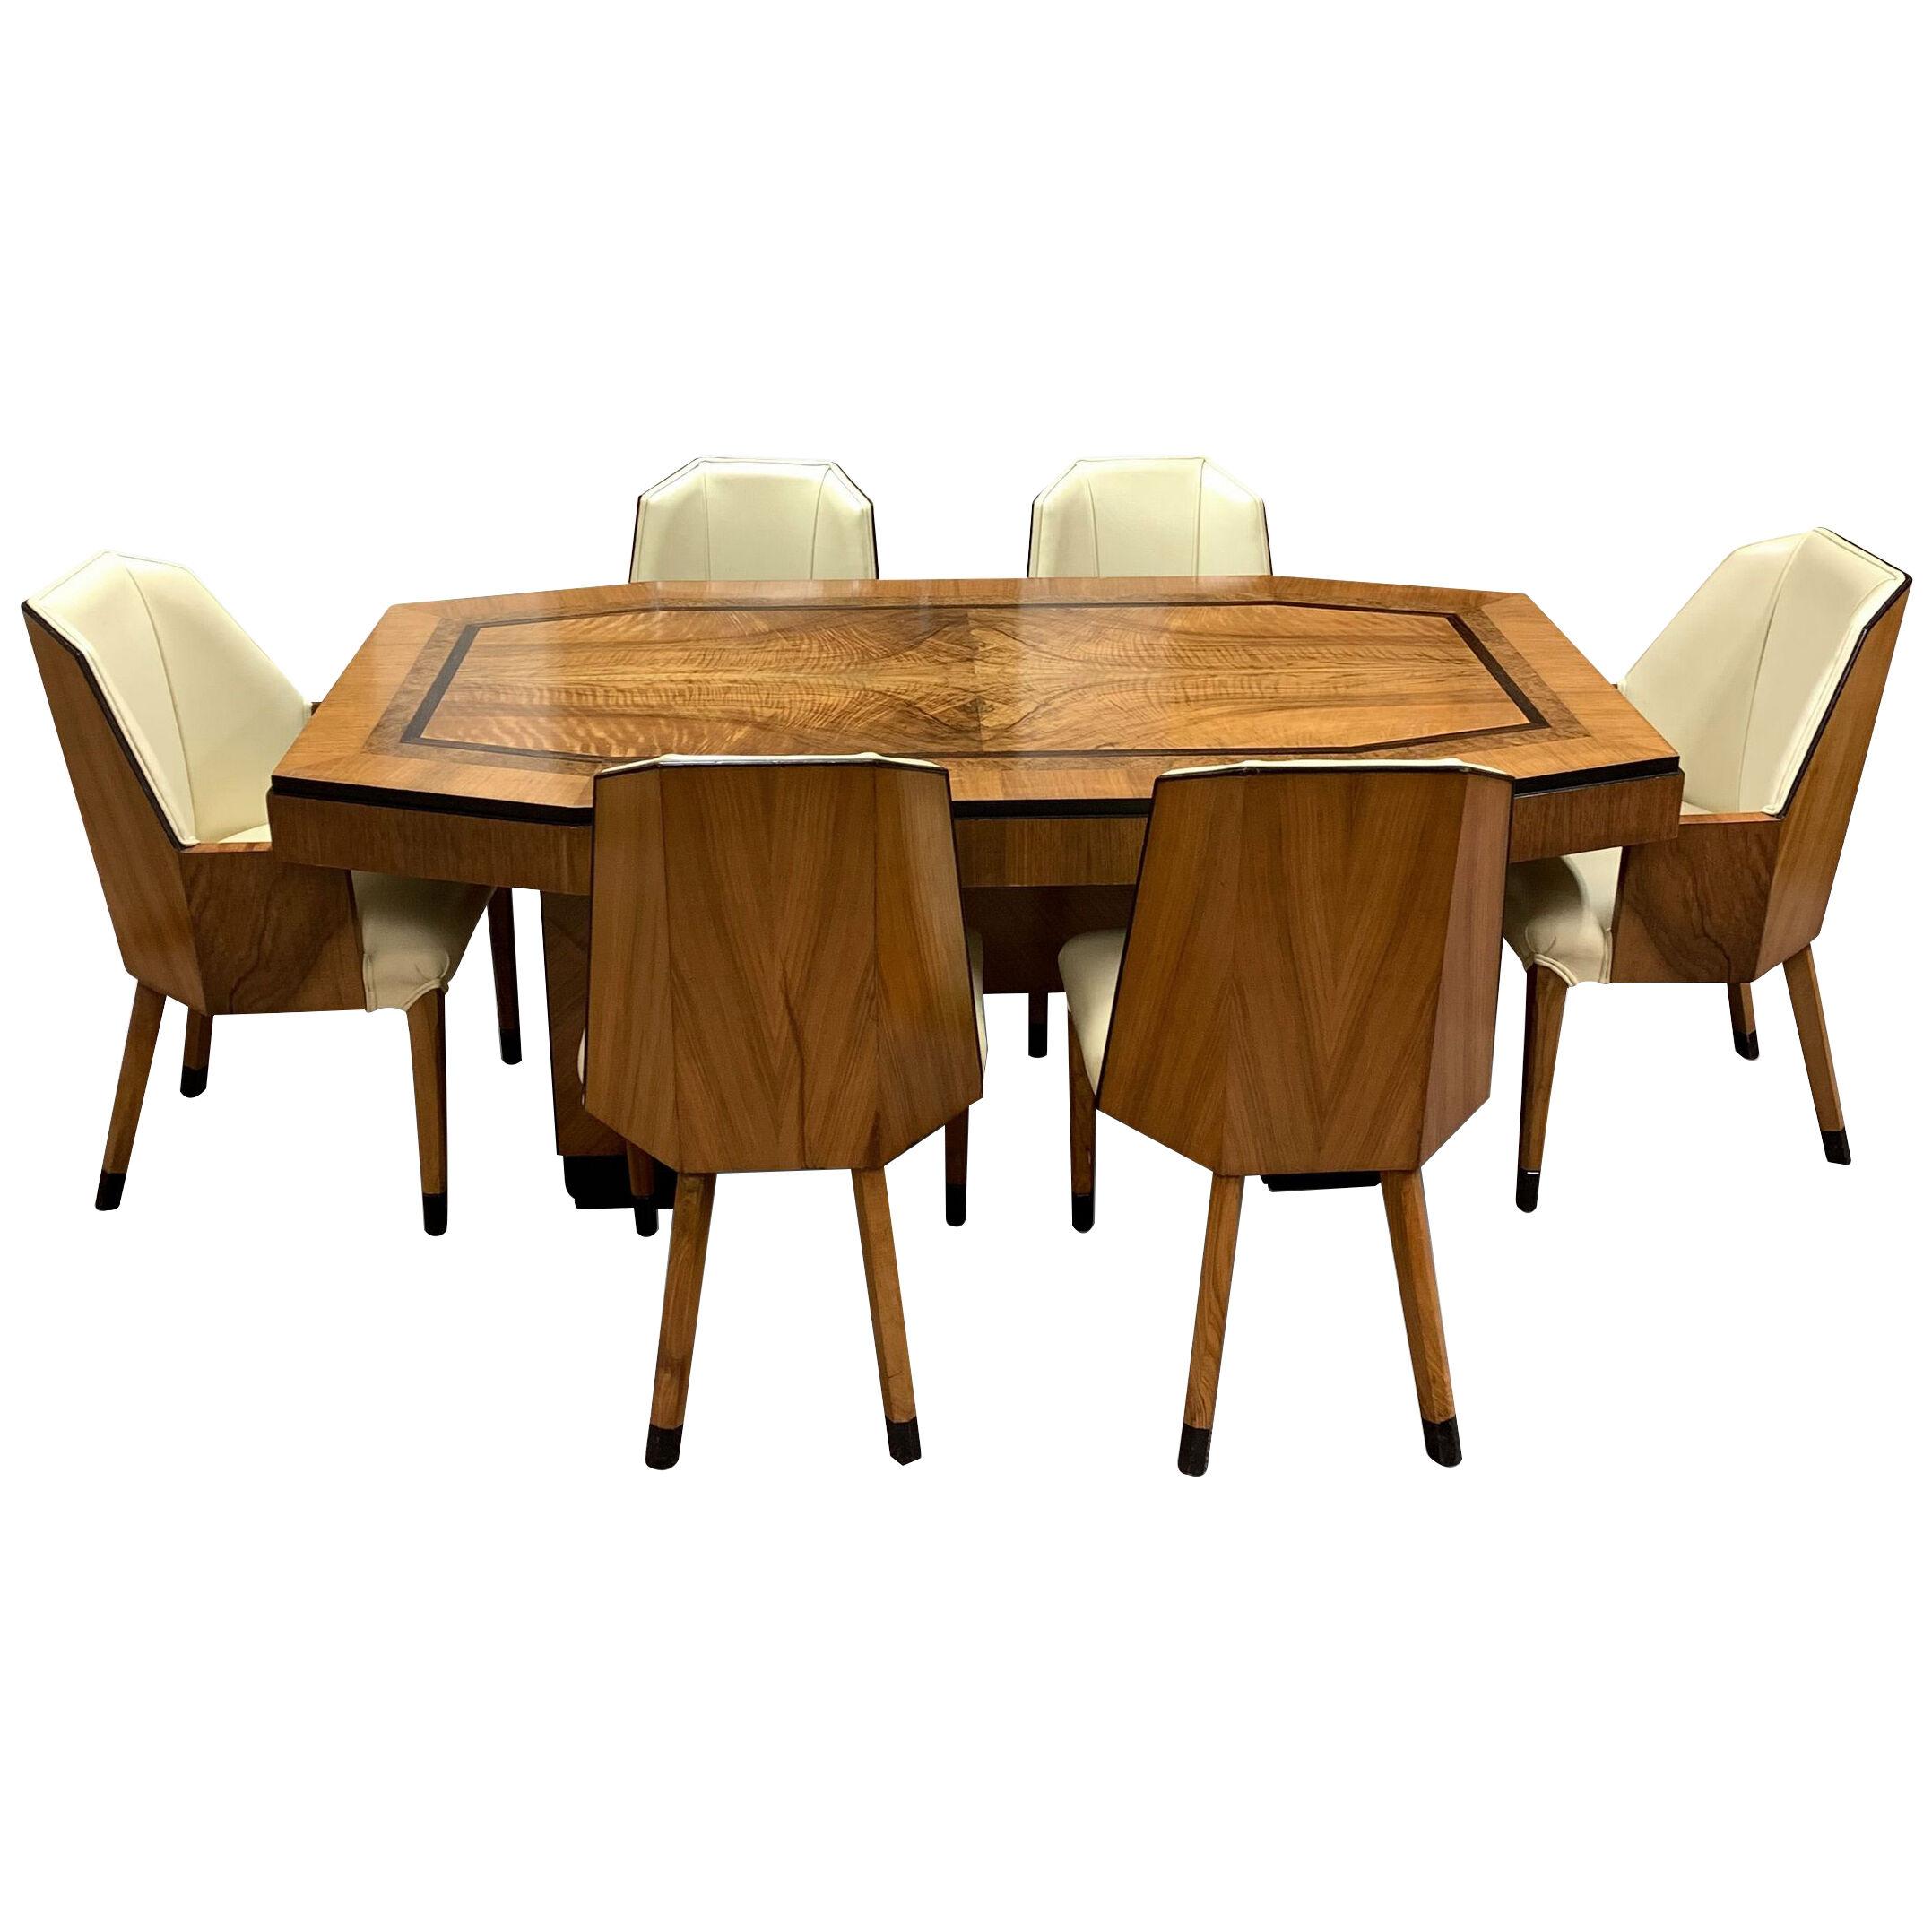 Hille Art Deco Dining Table with two Carver Armchairs and 4 Dining Chairs